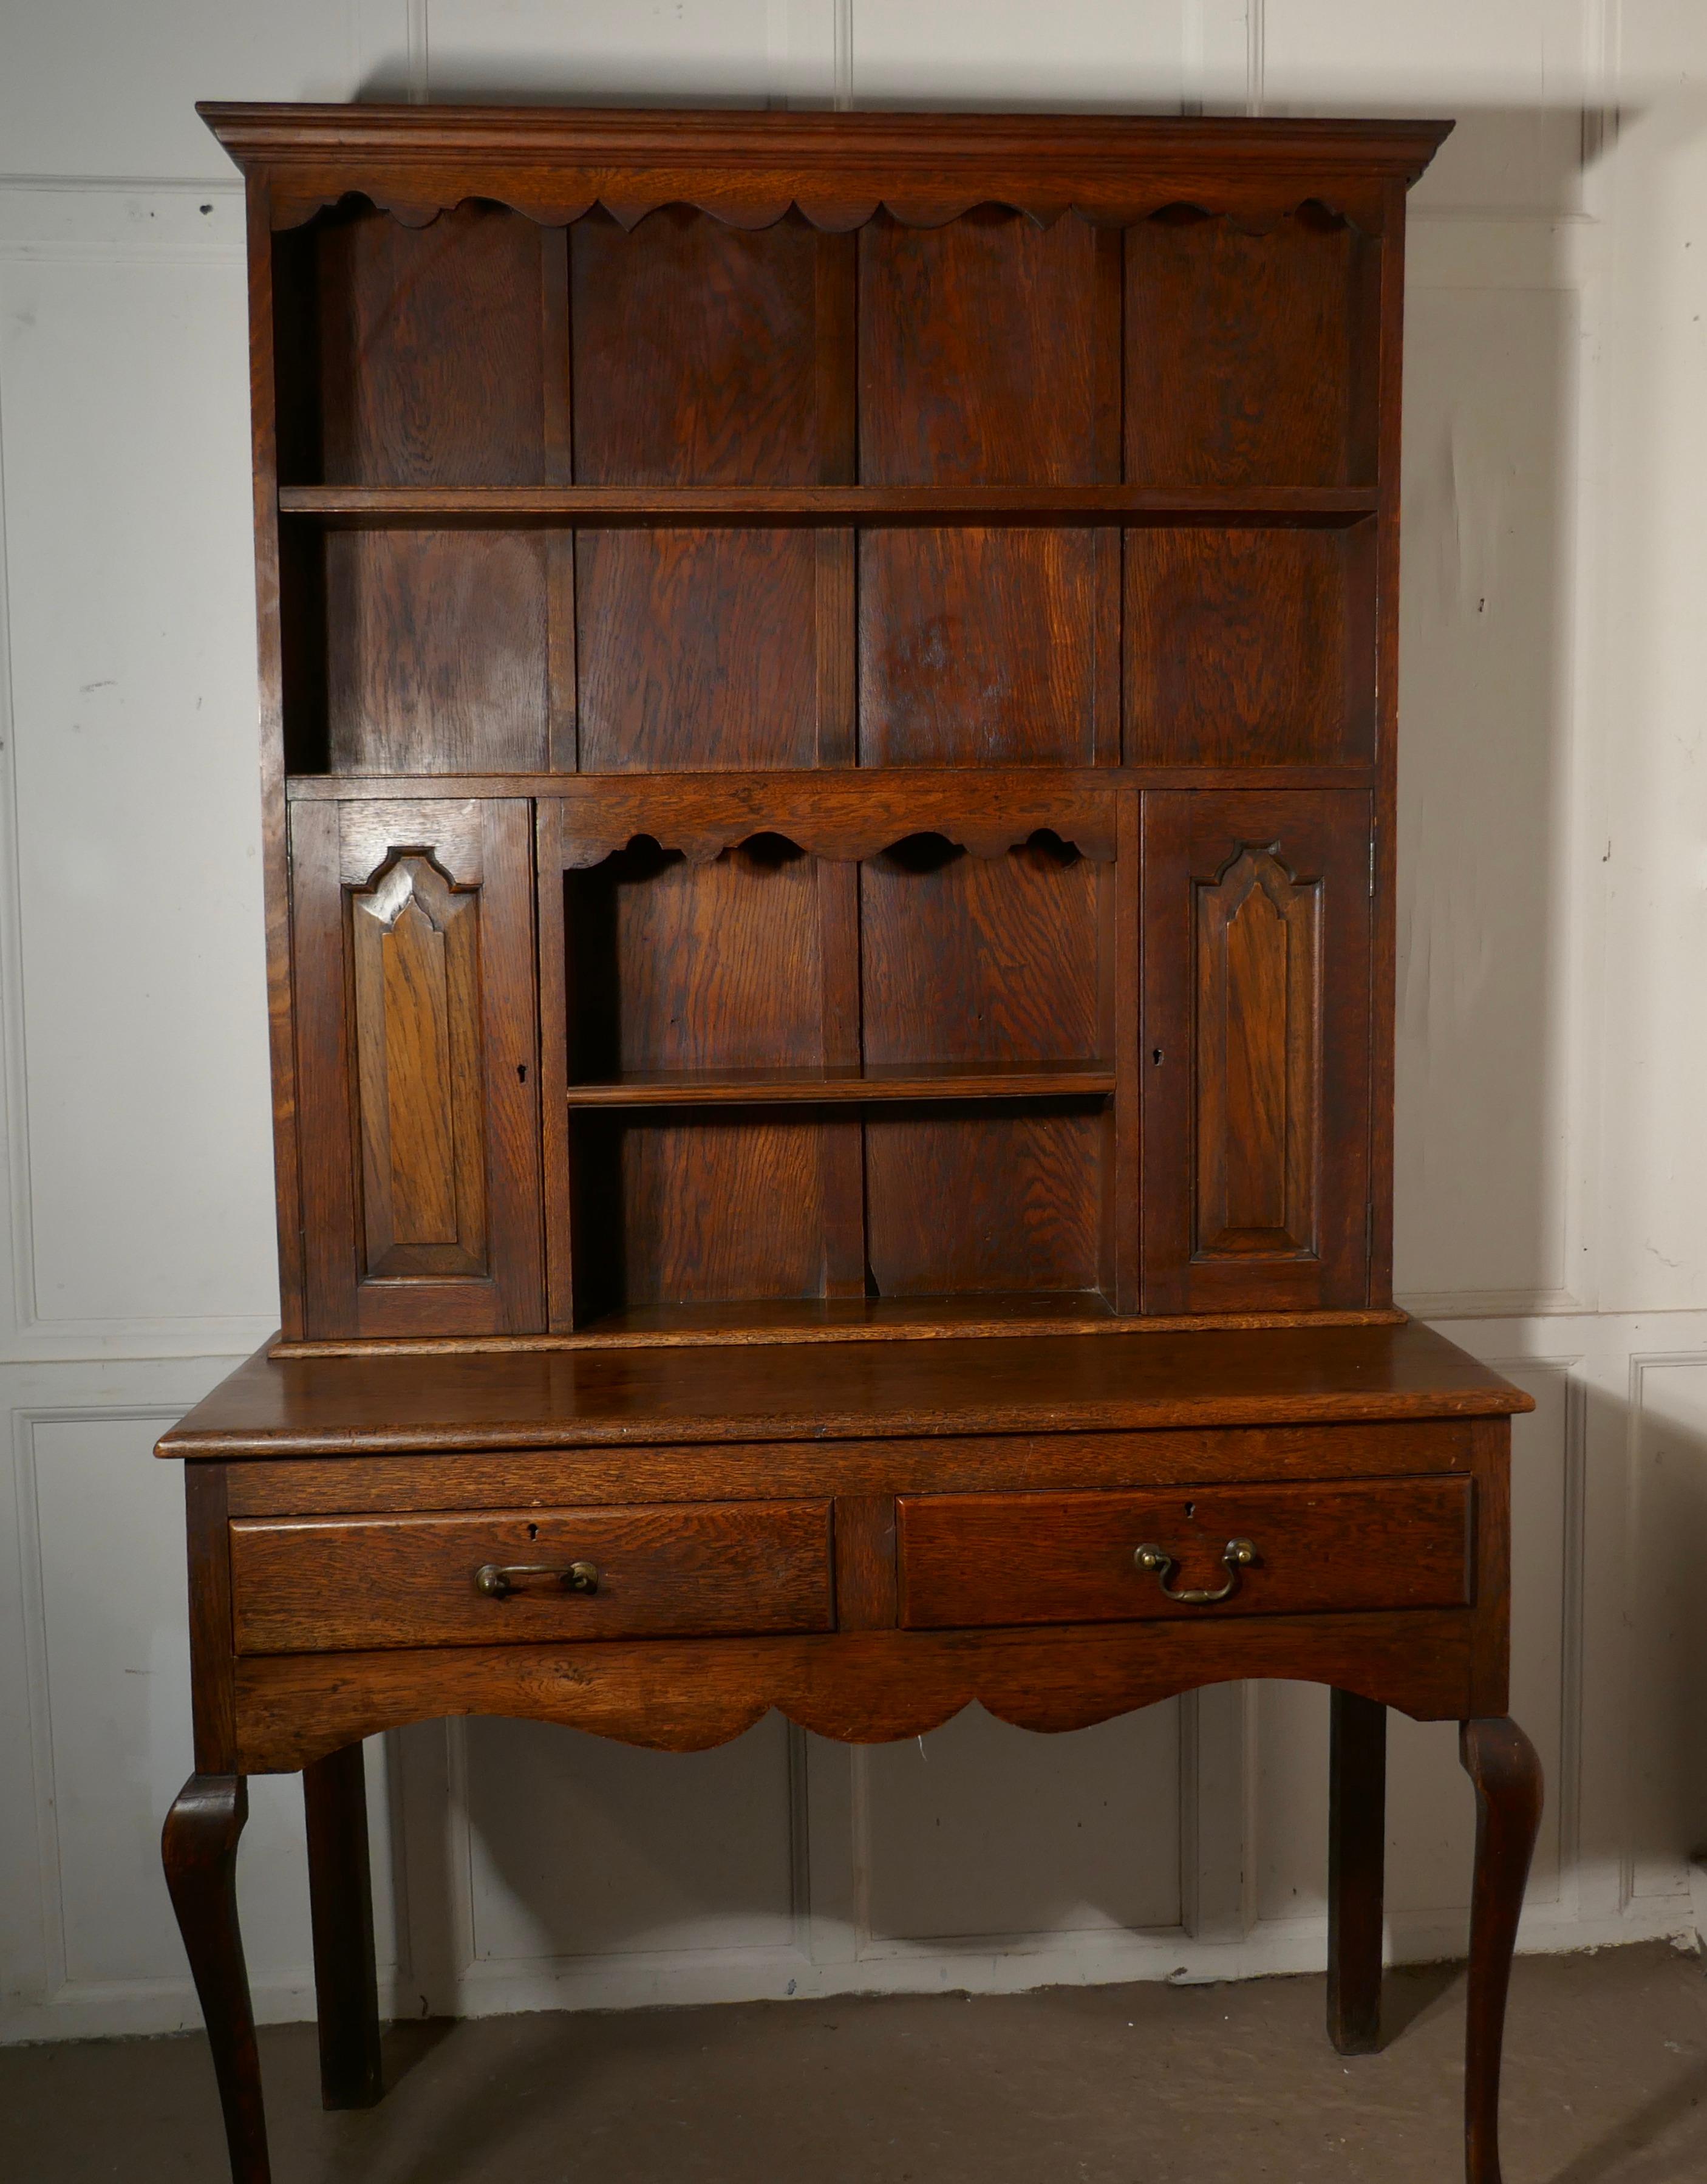 Early 20th century Gothic golden oak welsh dresser

The dresser has a shelved top beneath the long plate shelf below there are 2 cupboards one at each side with a shorter shelf in the middle, the shelves all have plate rails
The top cornice and